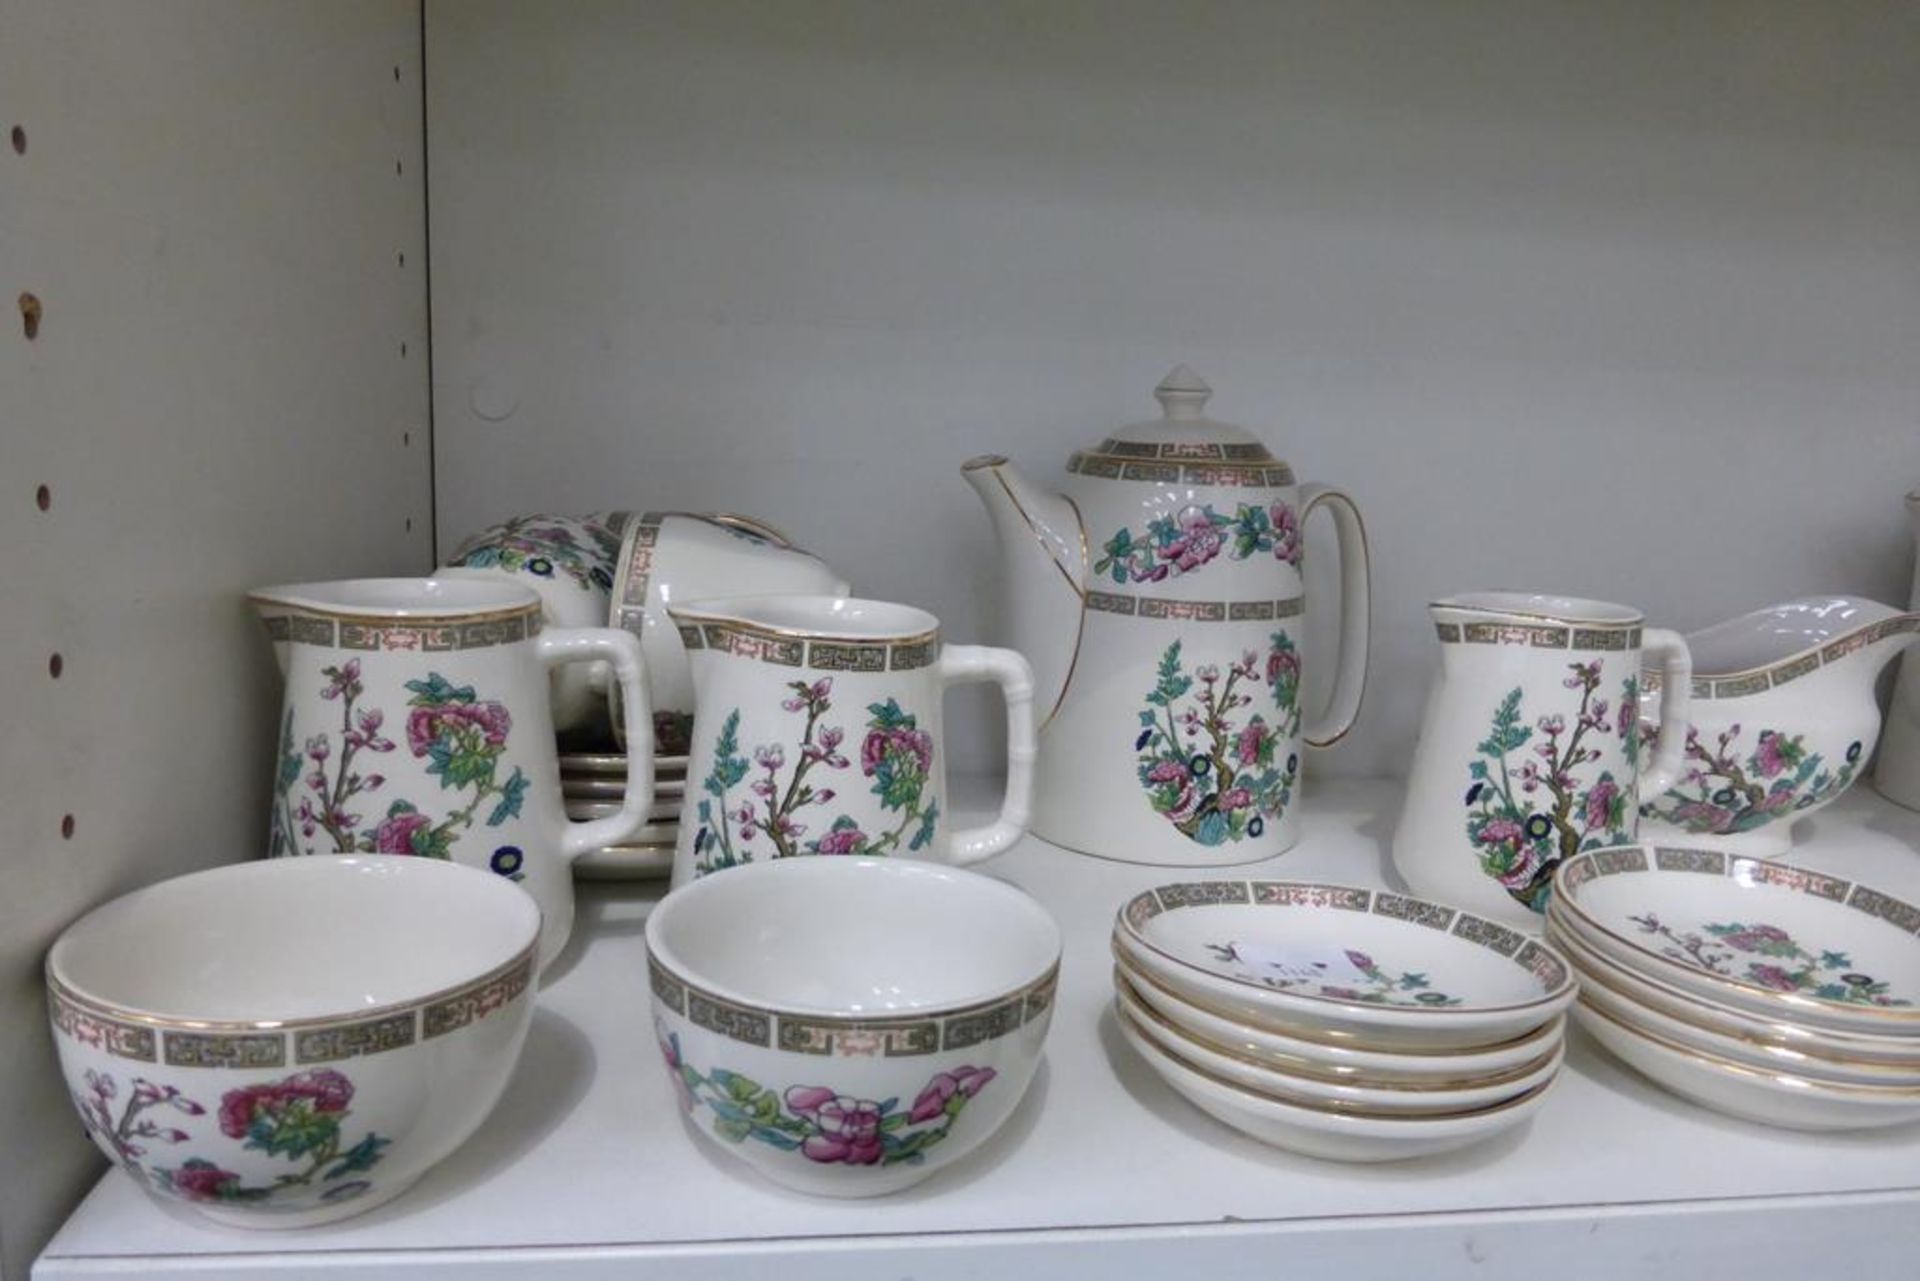 A large Sampson Bridgewood Ironstone Coffee/Dinner Service featuring coffeepots, coffee cans, - Image 2 of 6